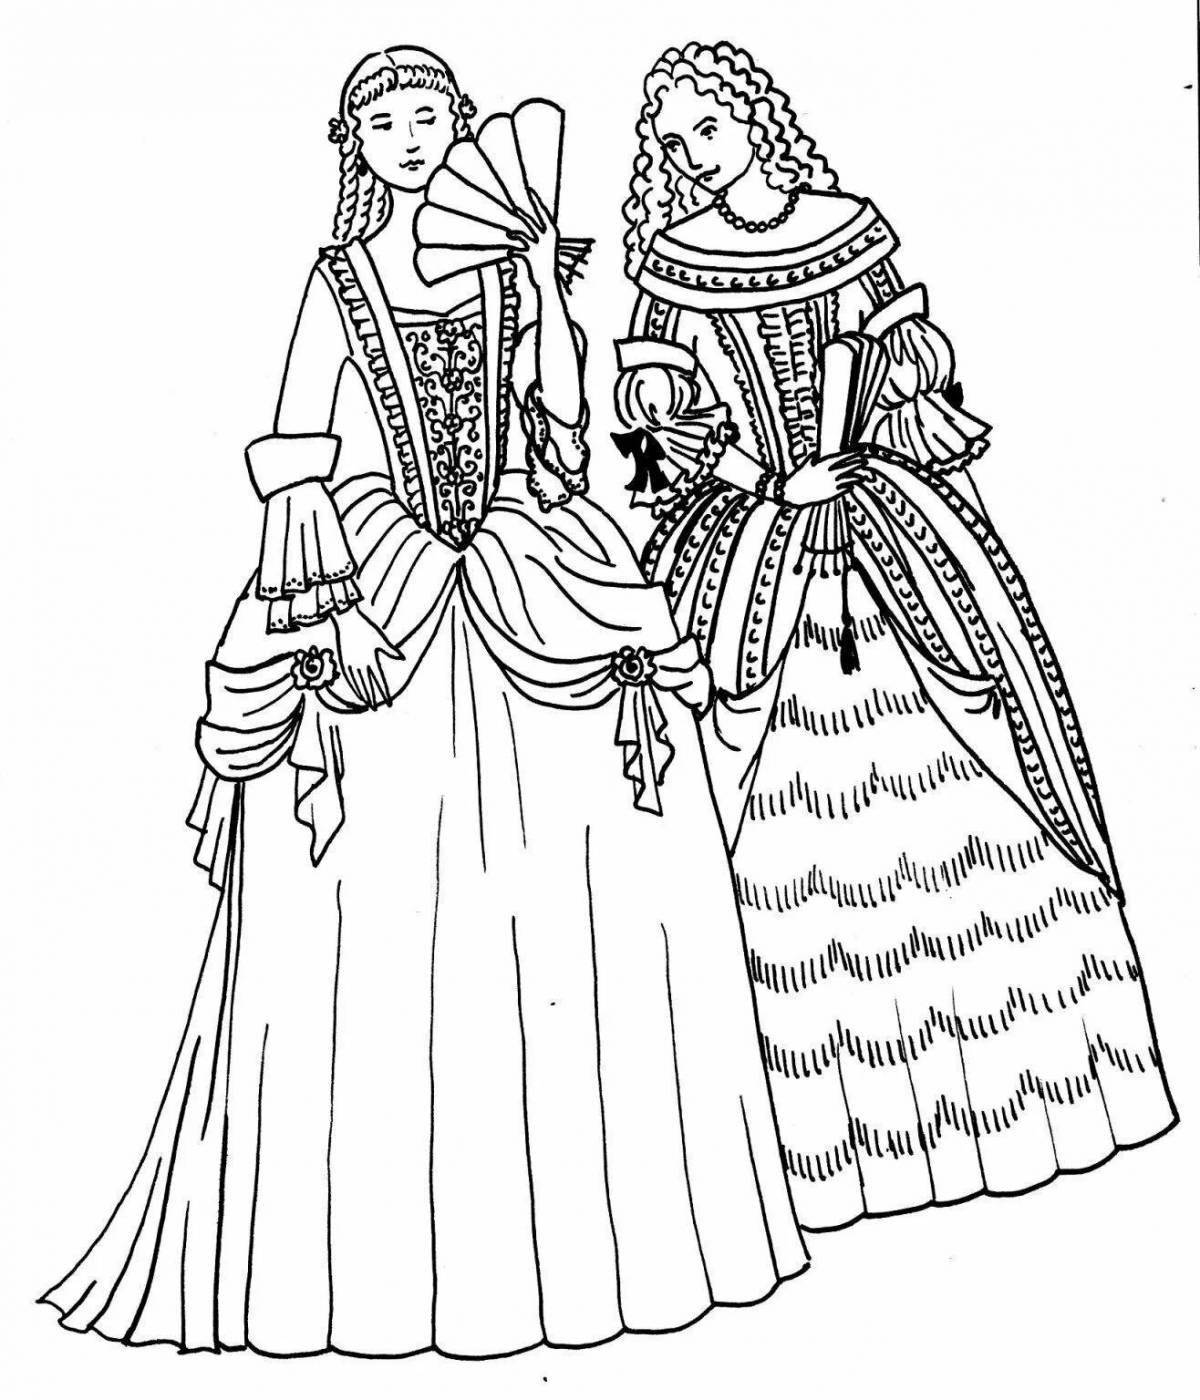 Coloring page bright costume of the 18th century